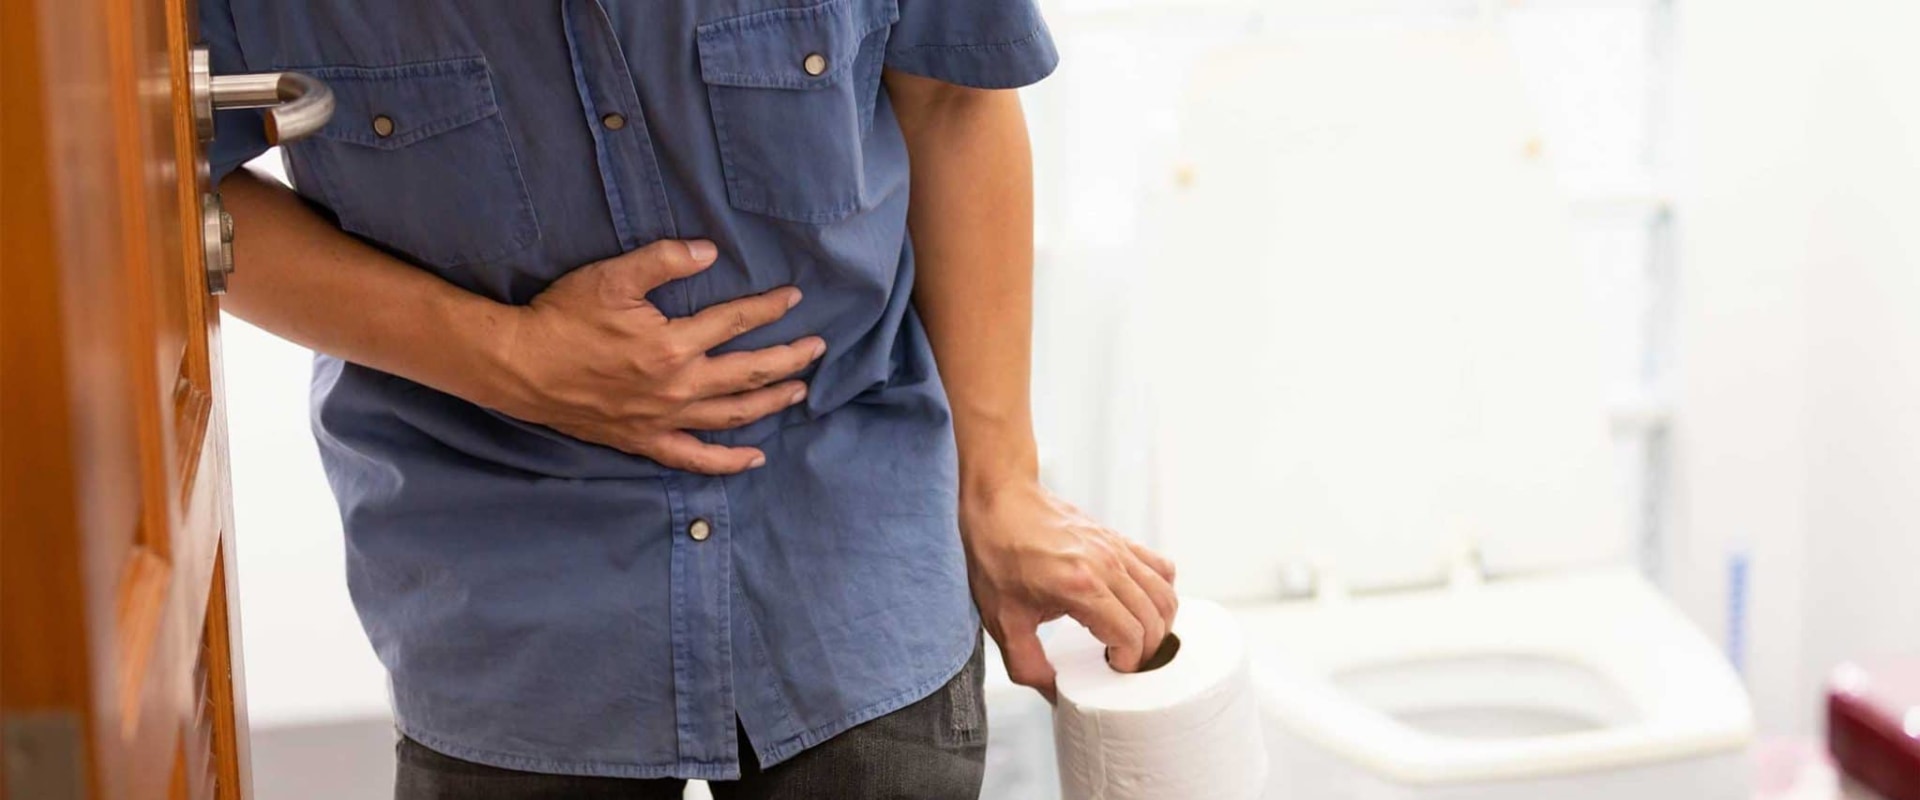 Does Alcohol Detox Cause Diarrhea? - An Expert's Perspective